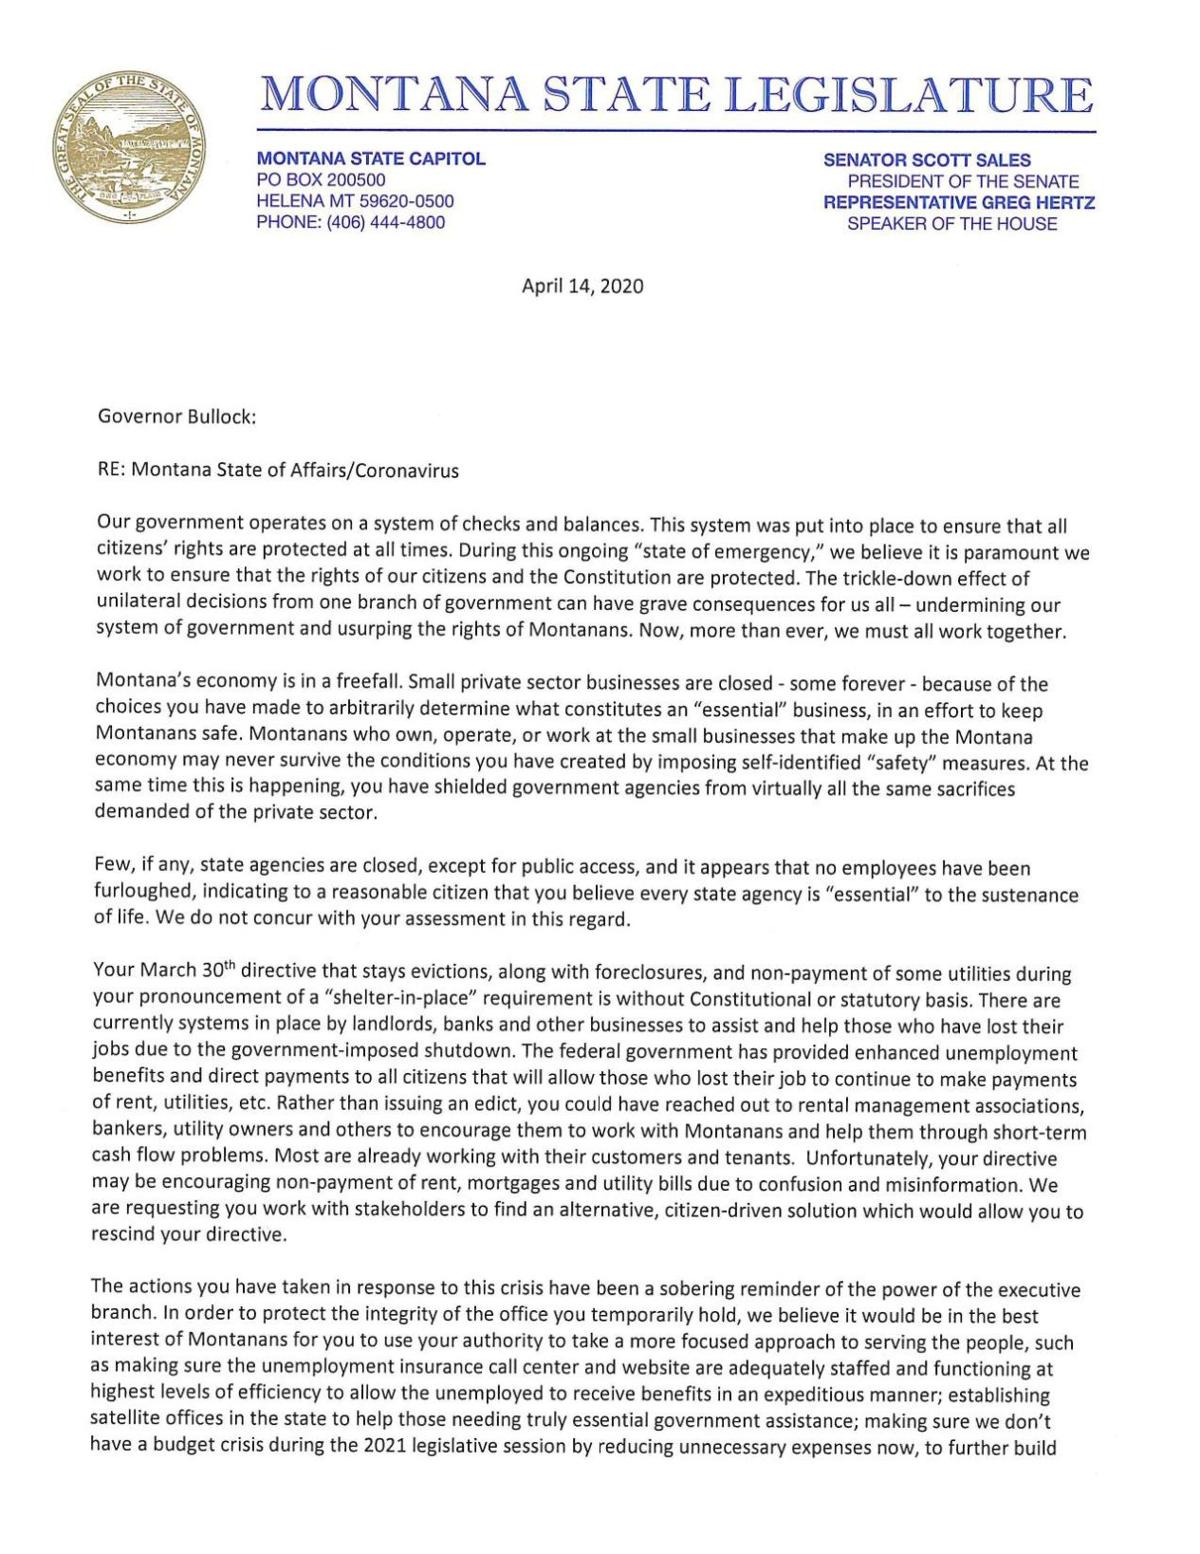 MT congress members write letter to gov. voicing COVID-30